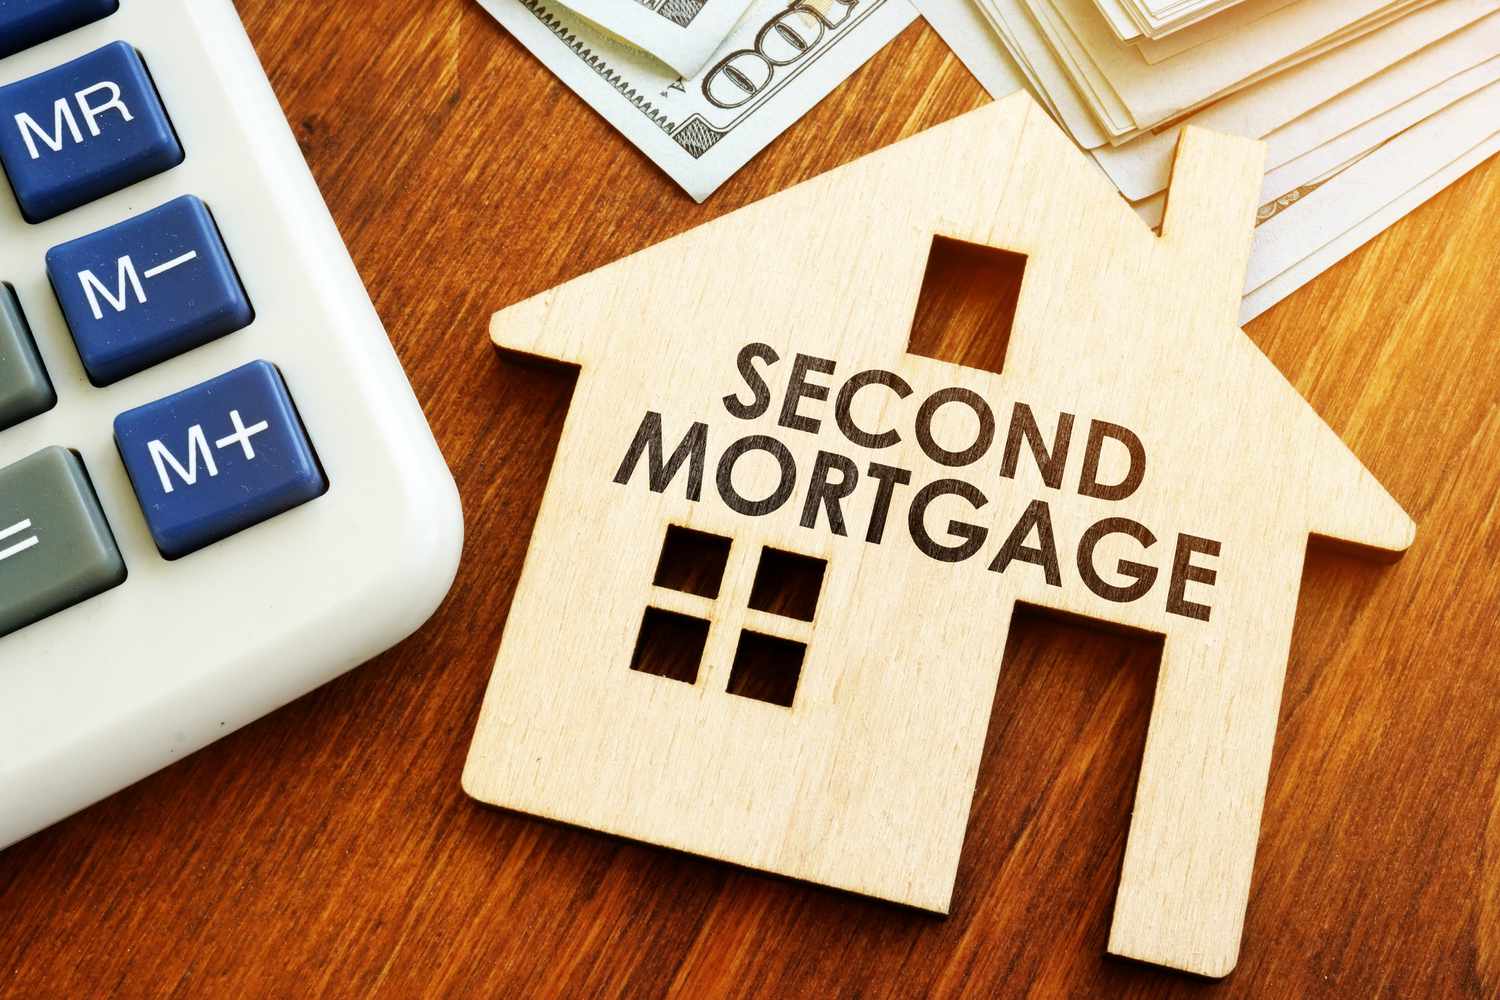 Second Mortgage: What It Is, How It Works, Lender Requirements